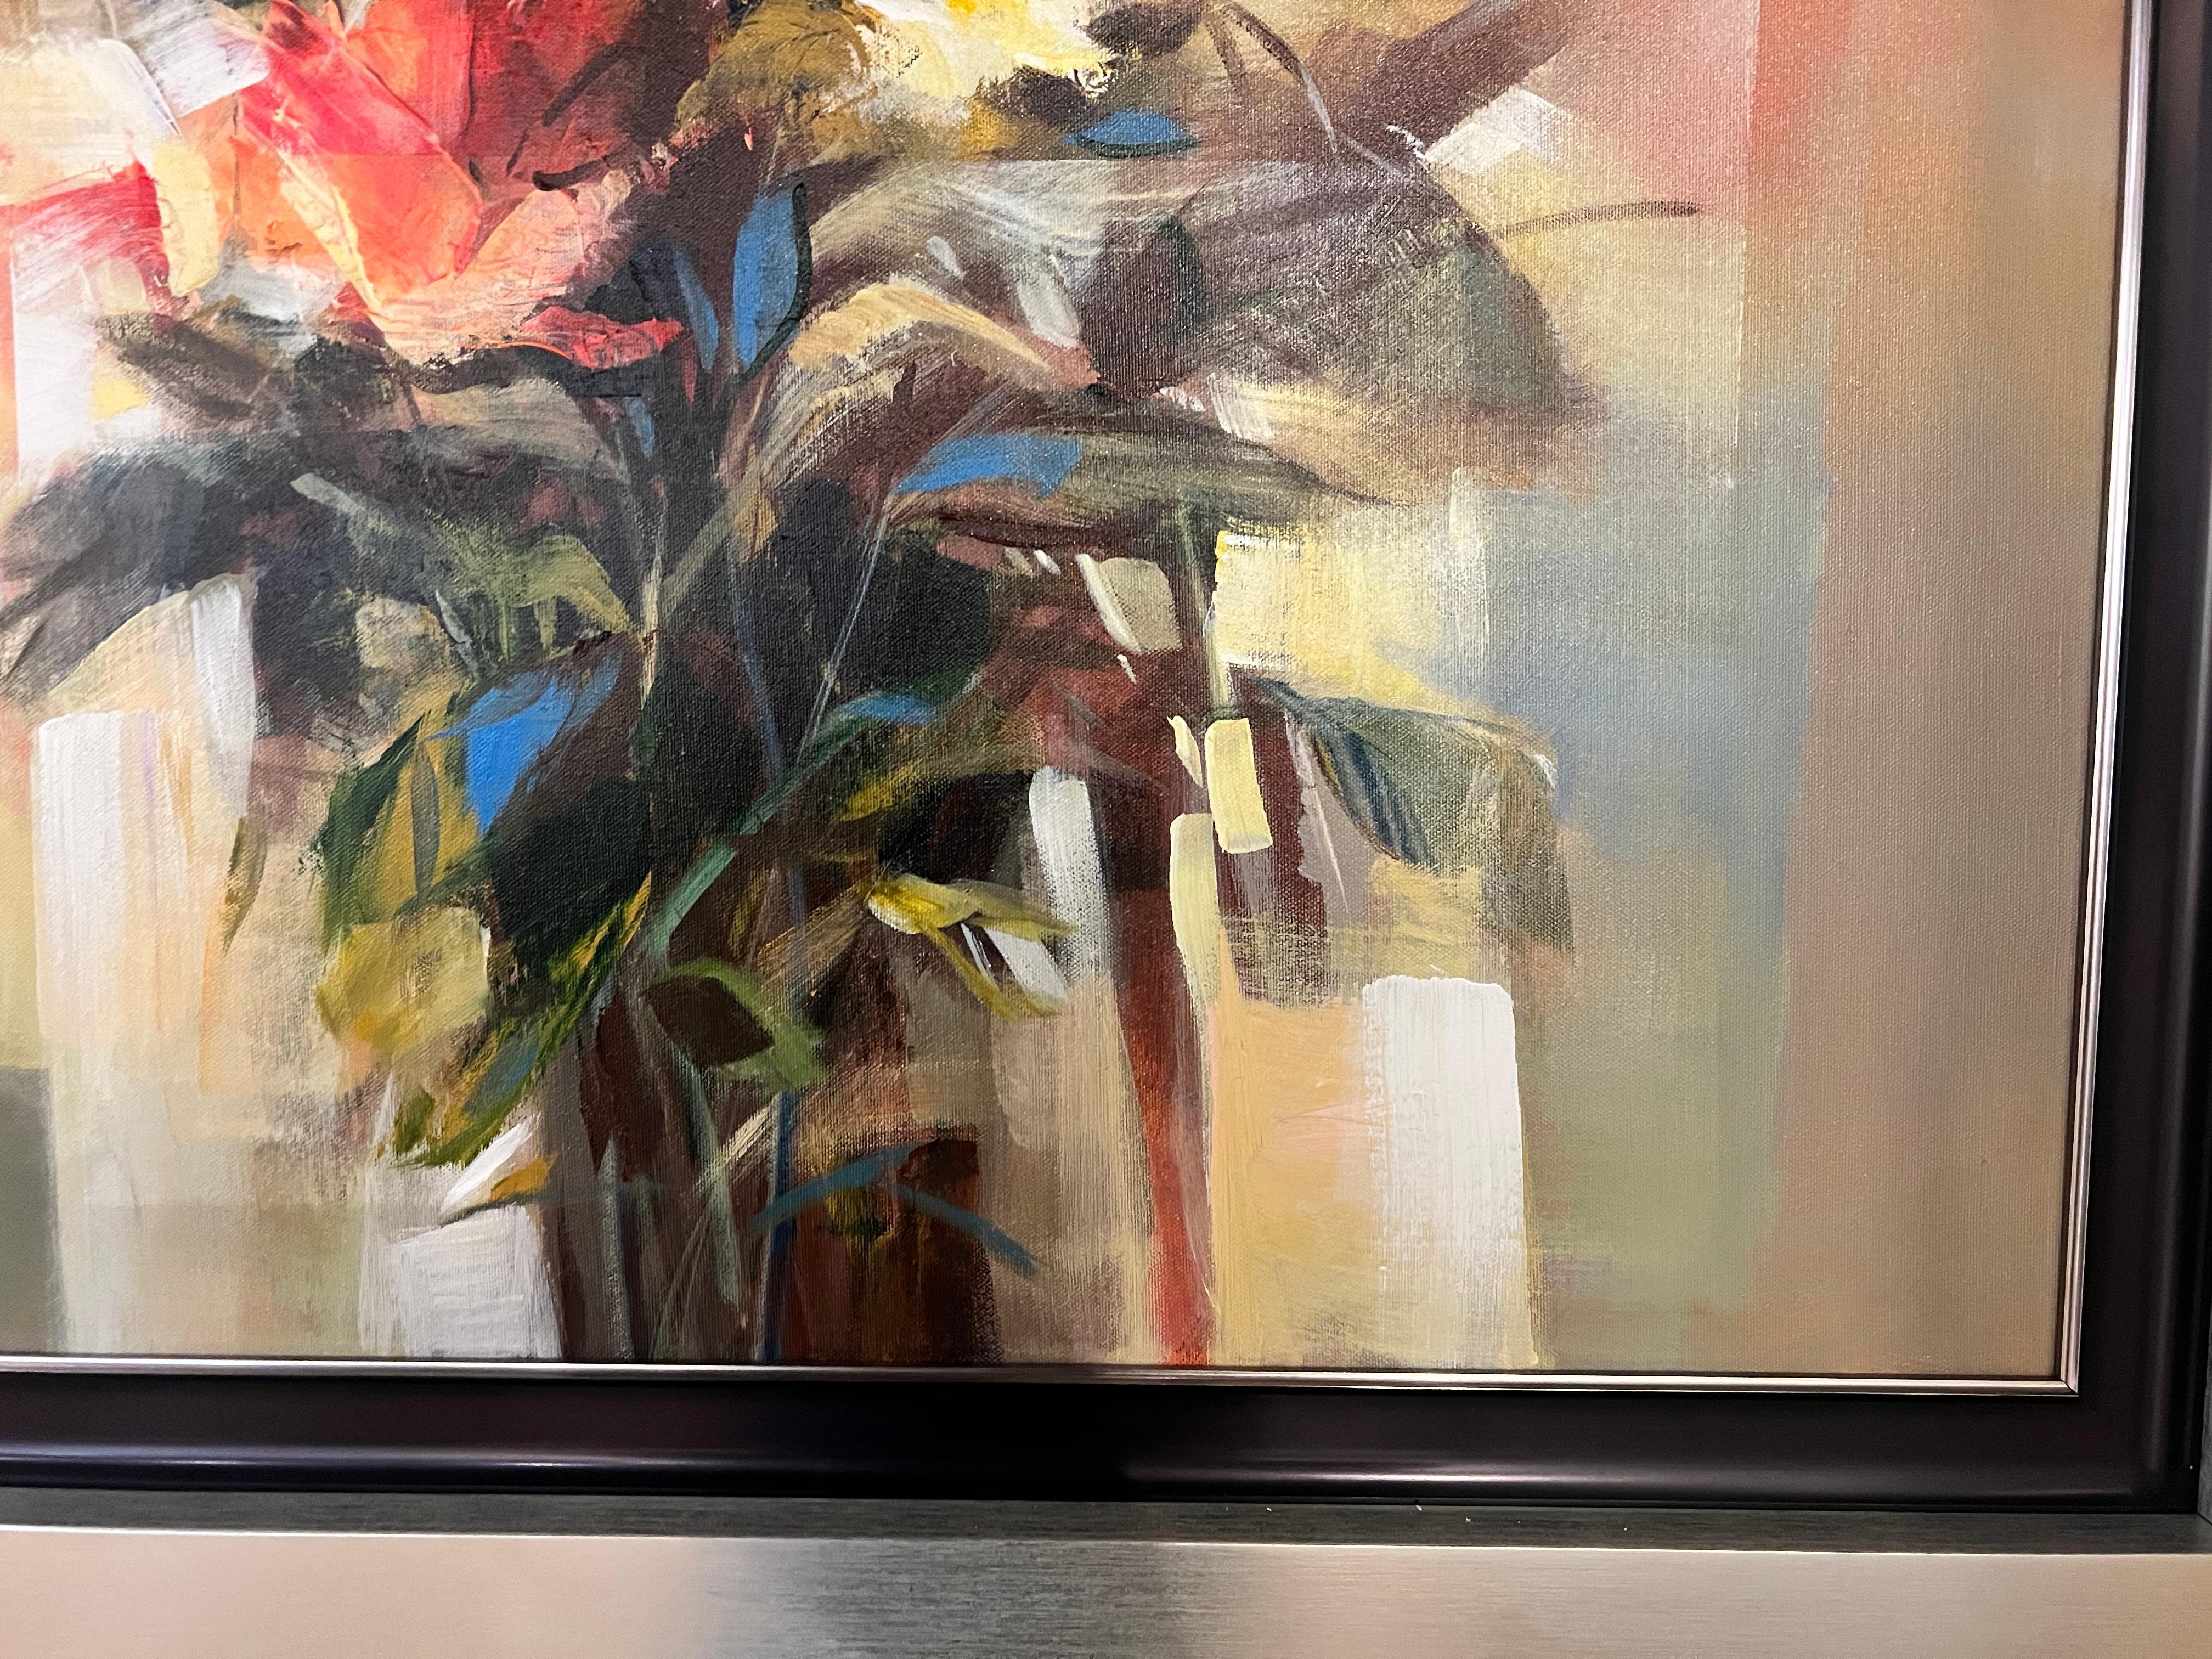 Flowers by the Window - Painting by Pietro Piccoli